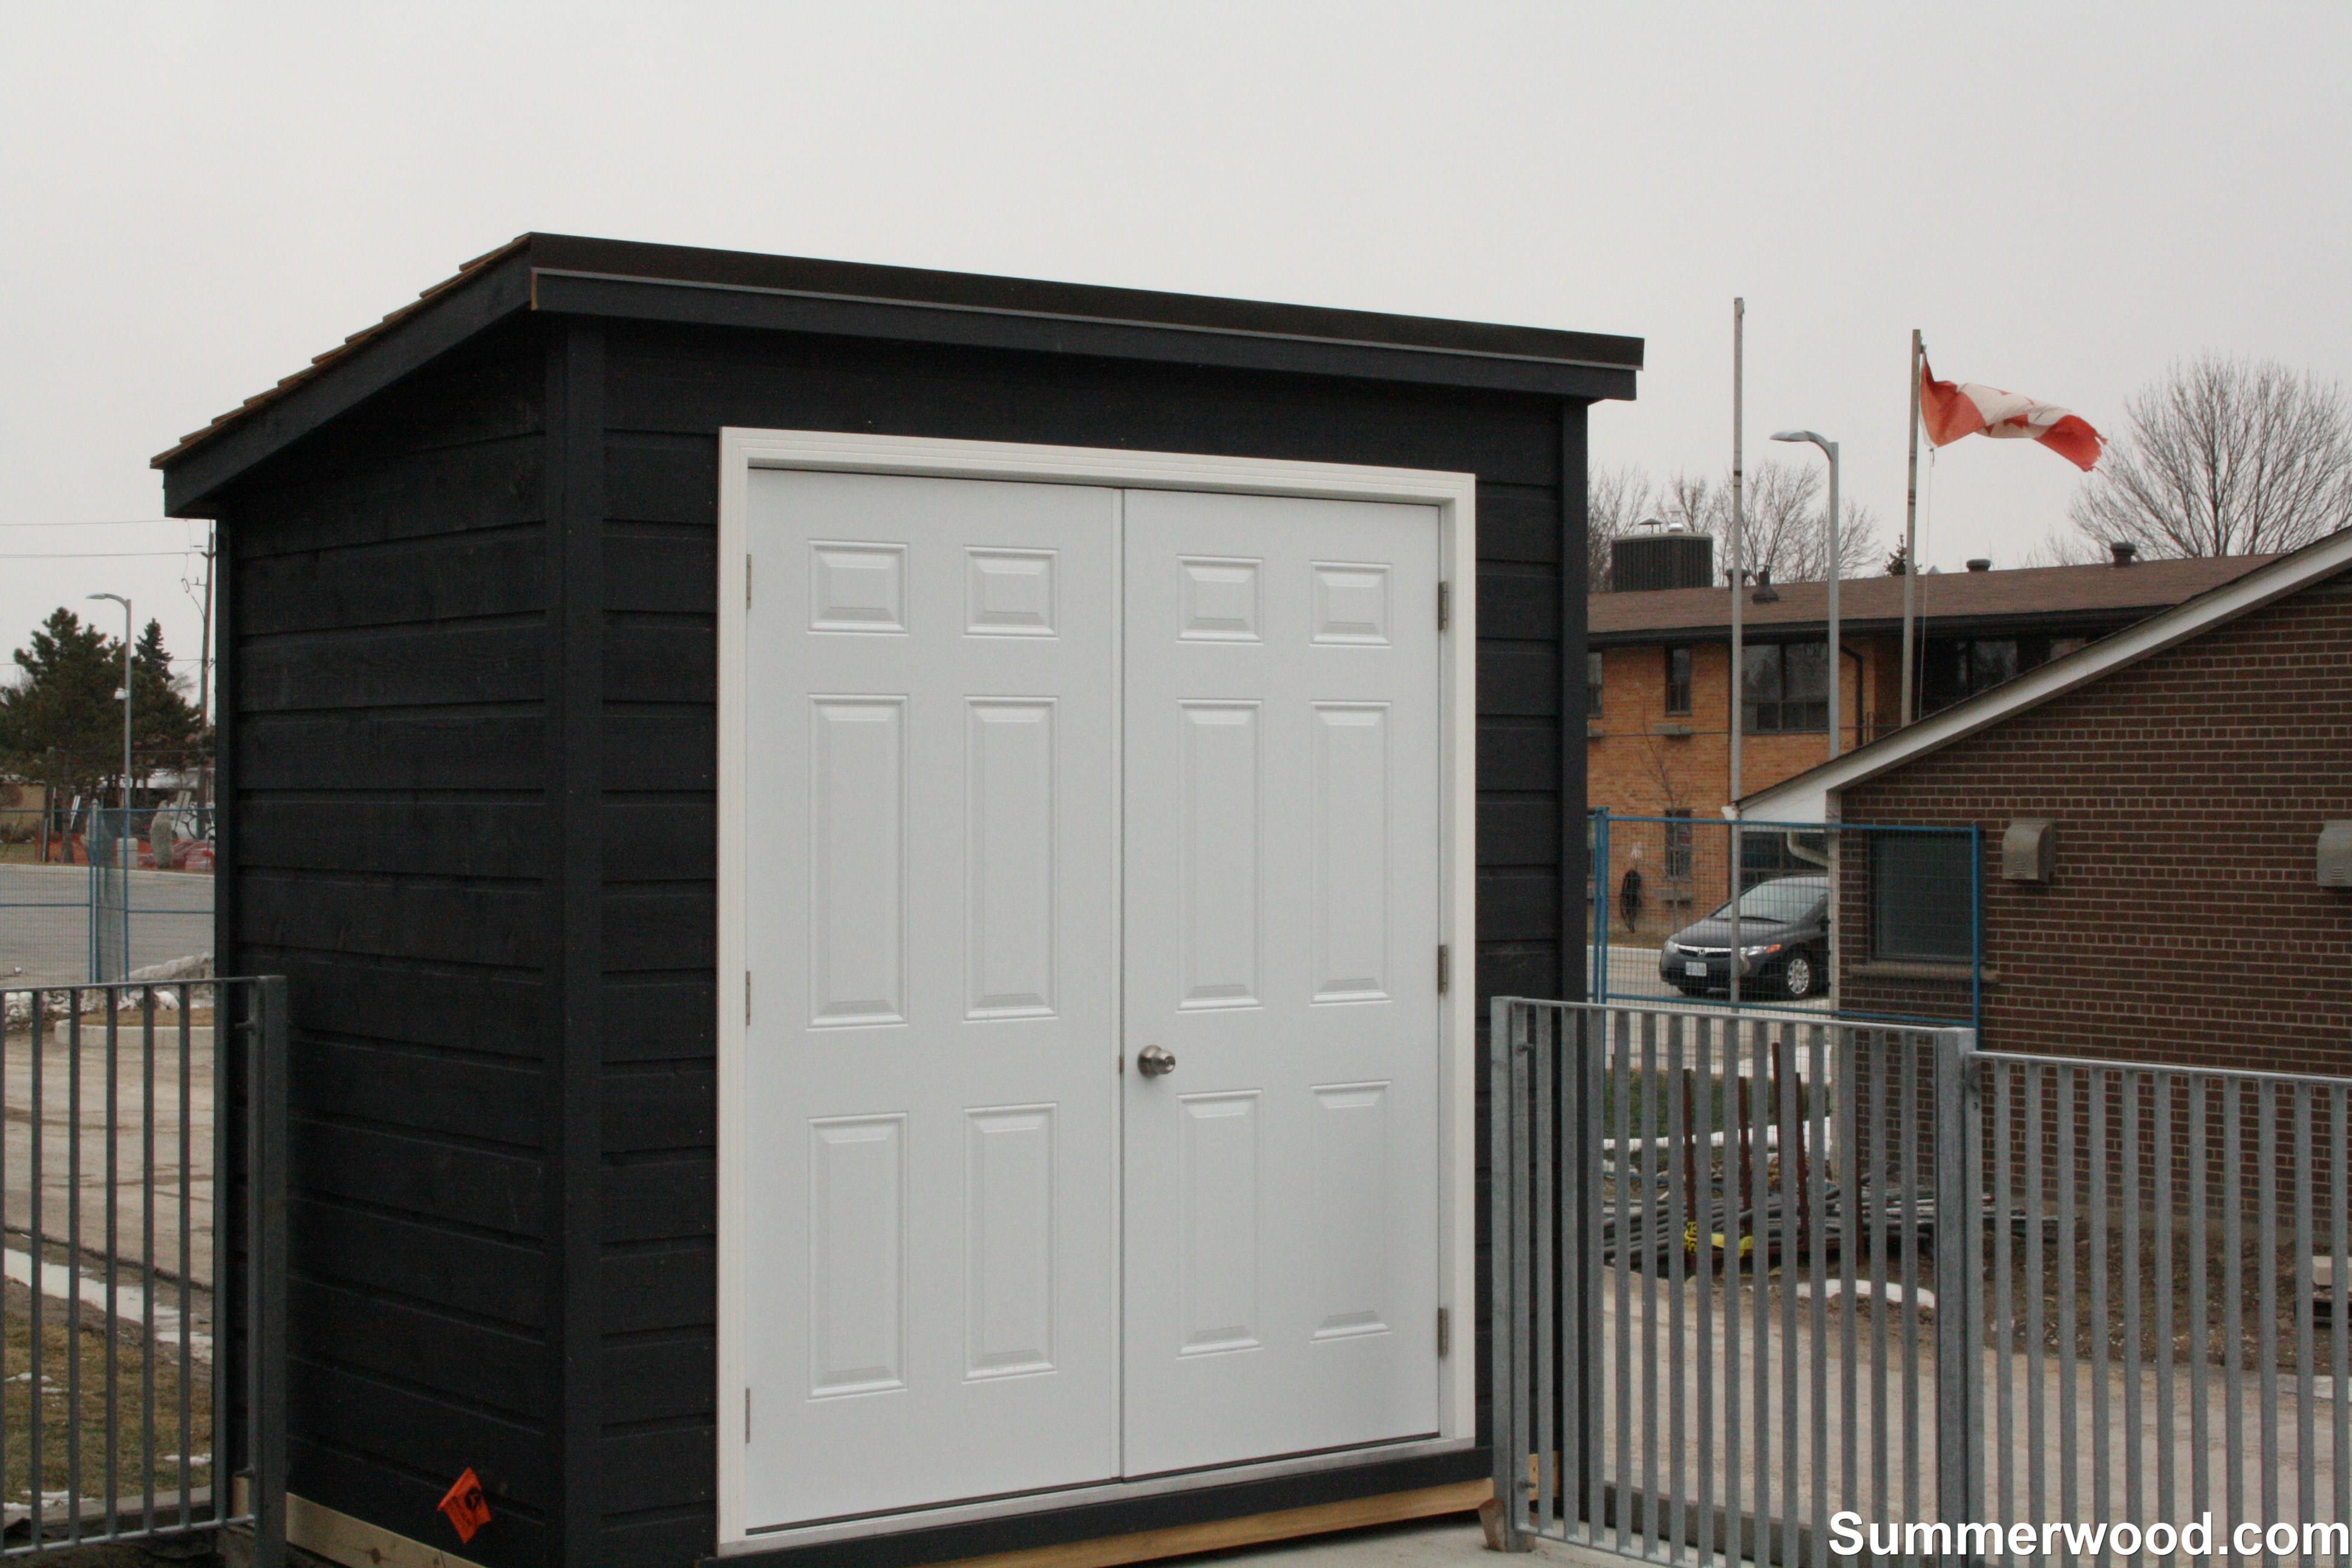 Black Sarawak shed 6x10 with metal double doors in Etobicoke, Ontario. ID number 176702.